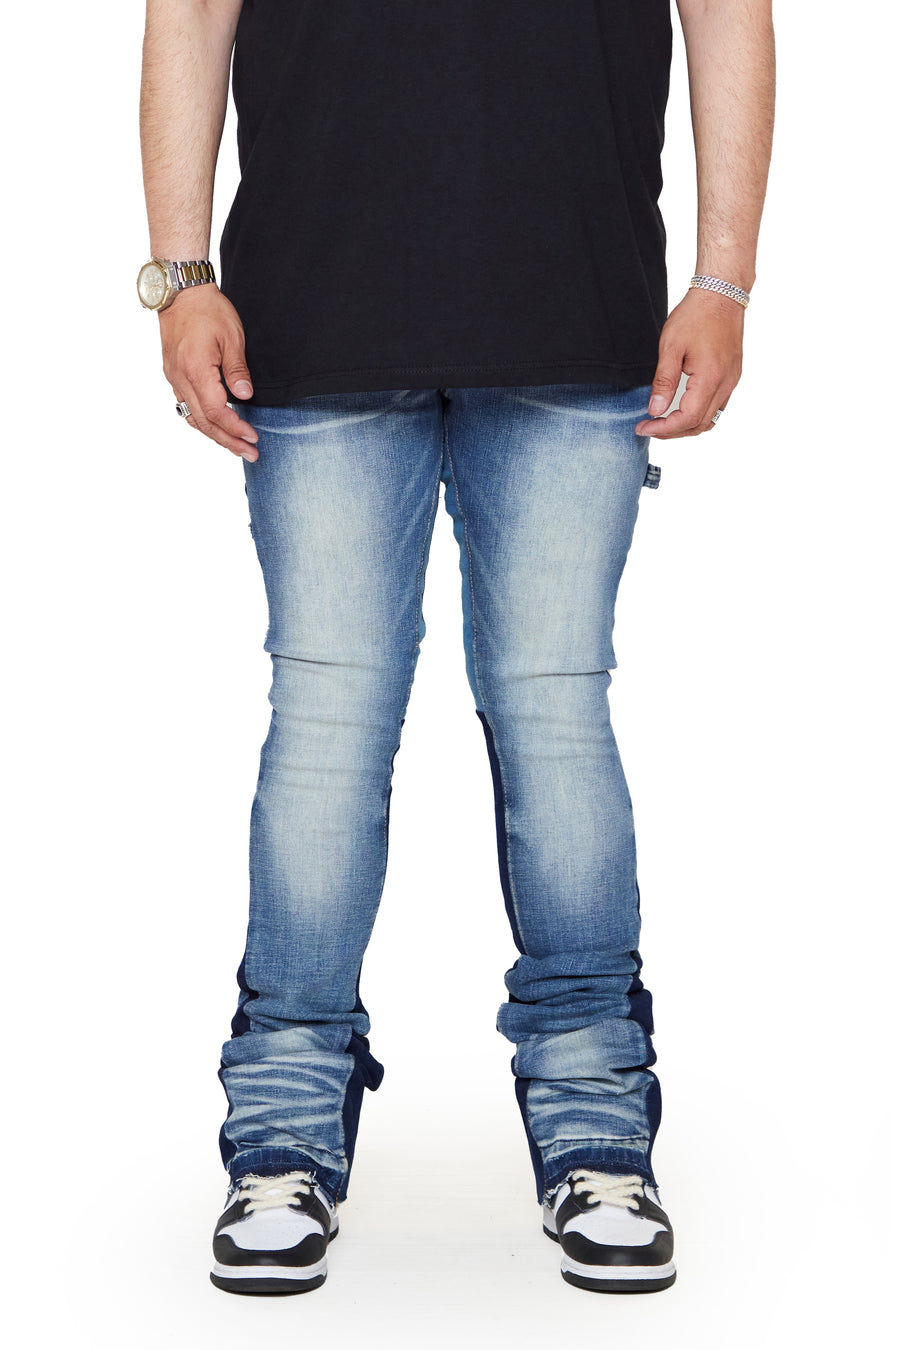 “VERTICLE” BLUE WASH STACKED FLARE JEAN